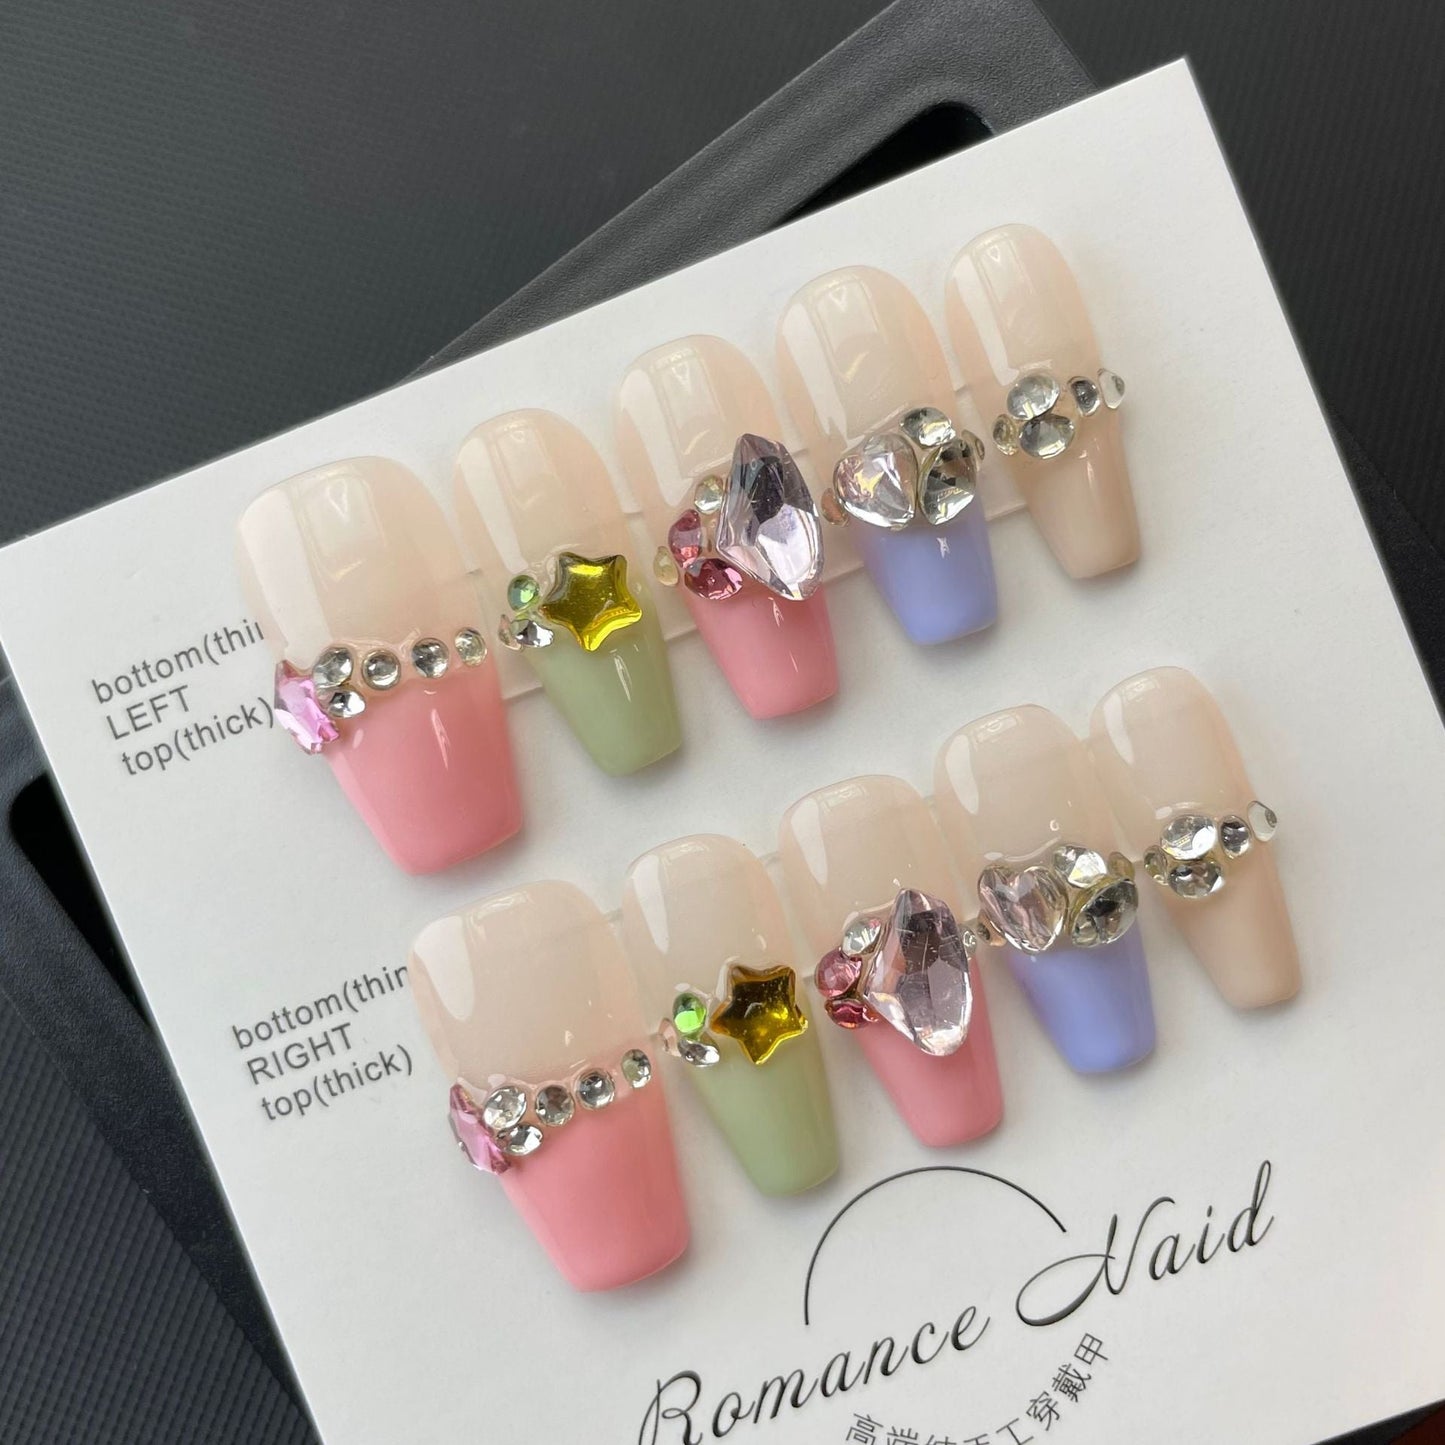 691 French Sweetness style press on nails 100% handmade false nails nude color mixed color